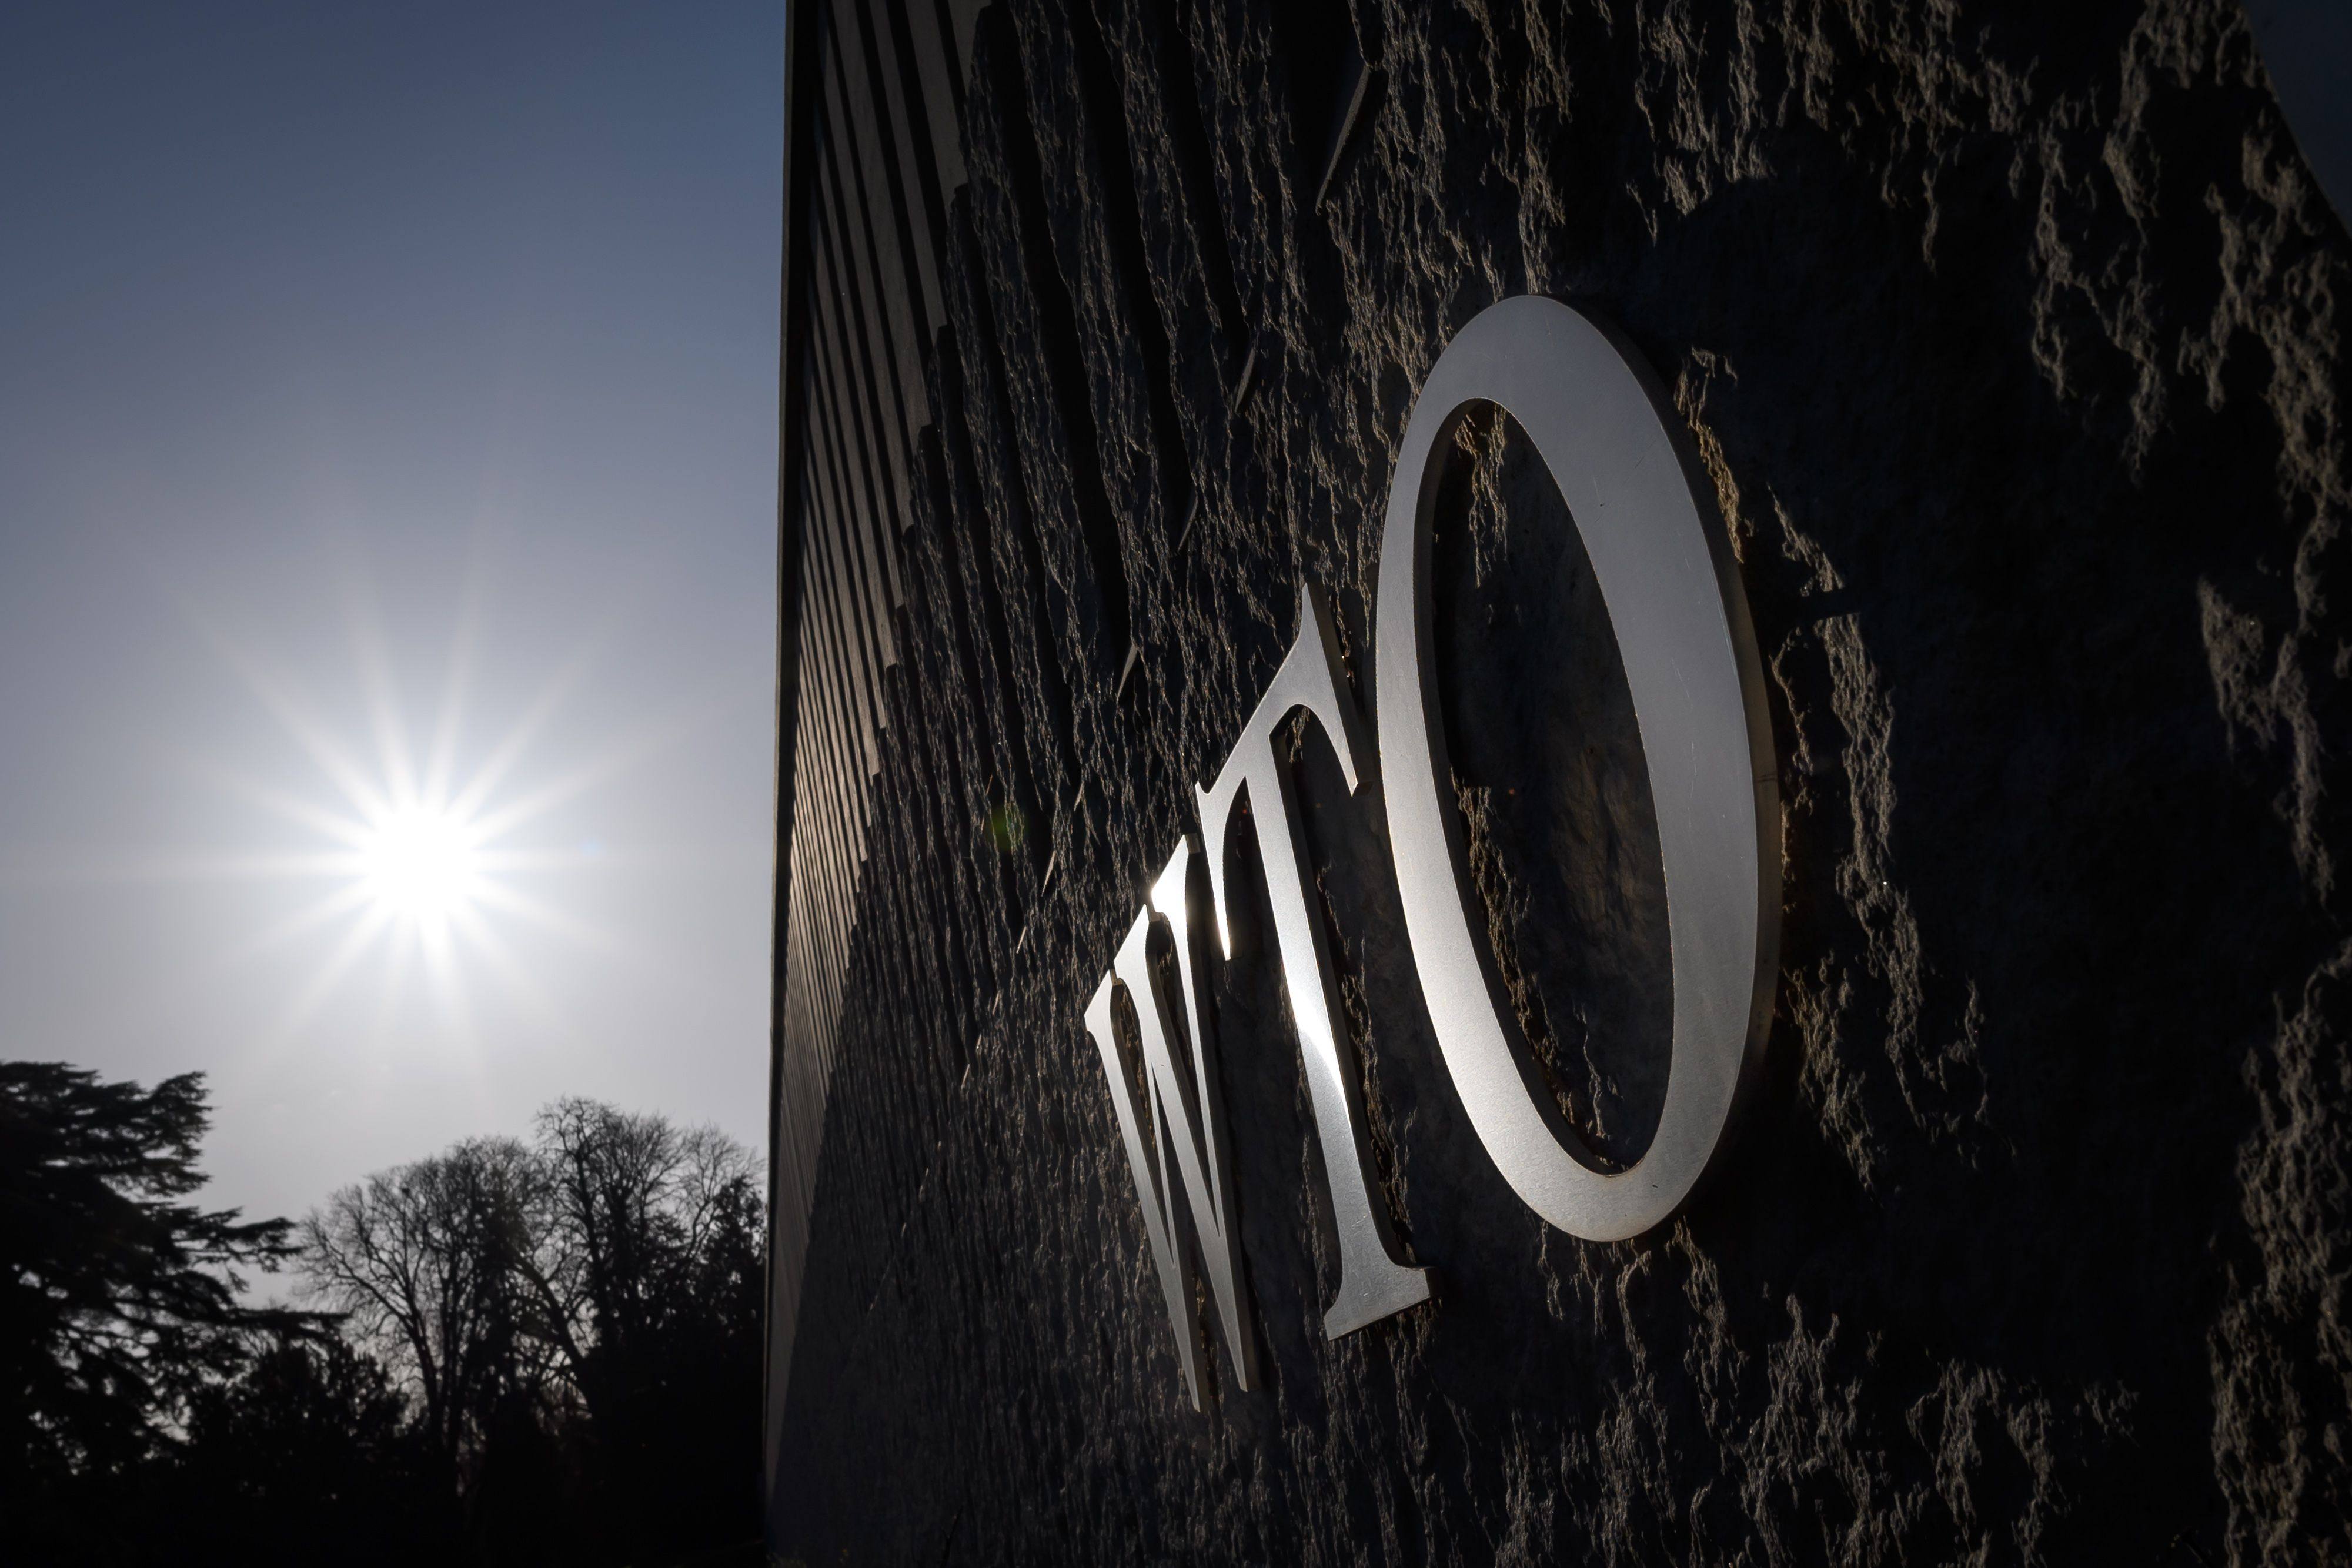 The World Trade Organization is asked  get its dispute resolution system back on track by next year after Washington hamstrung its operations in retaliation for the Beijing-imposed national security law. Photo: AFP